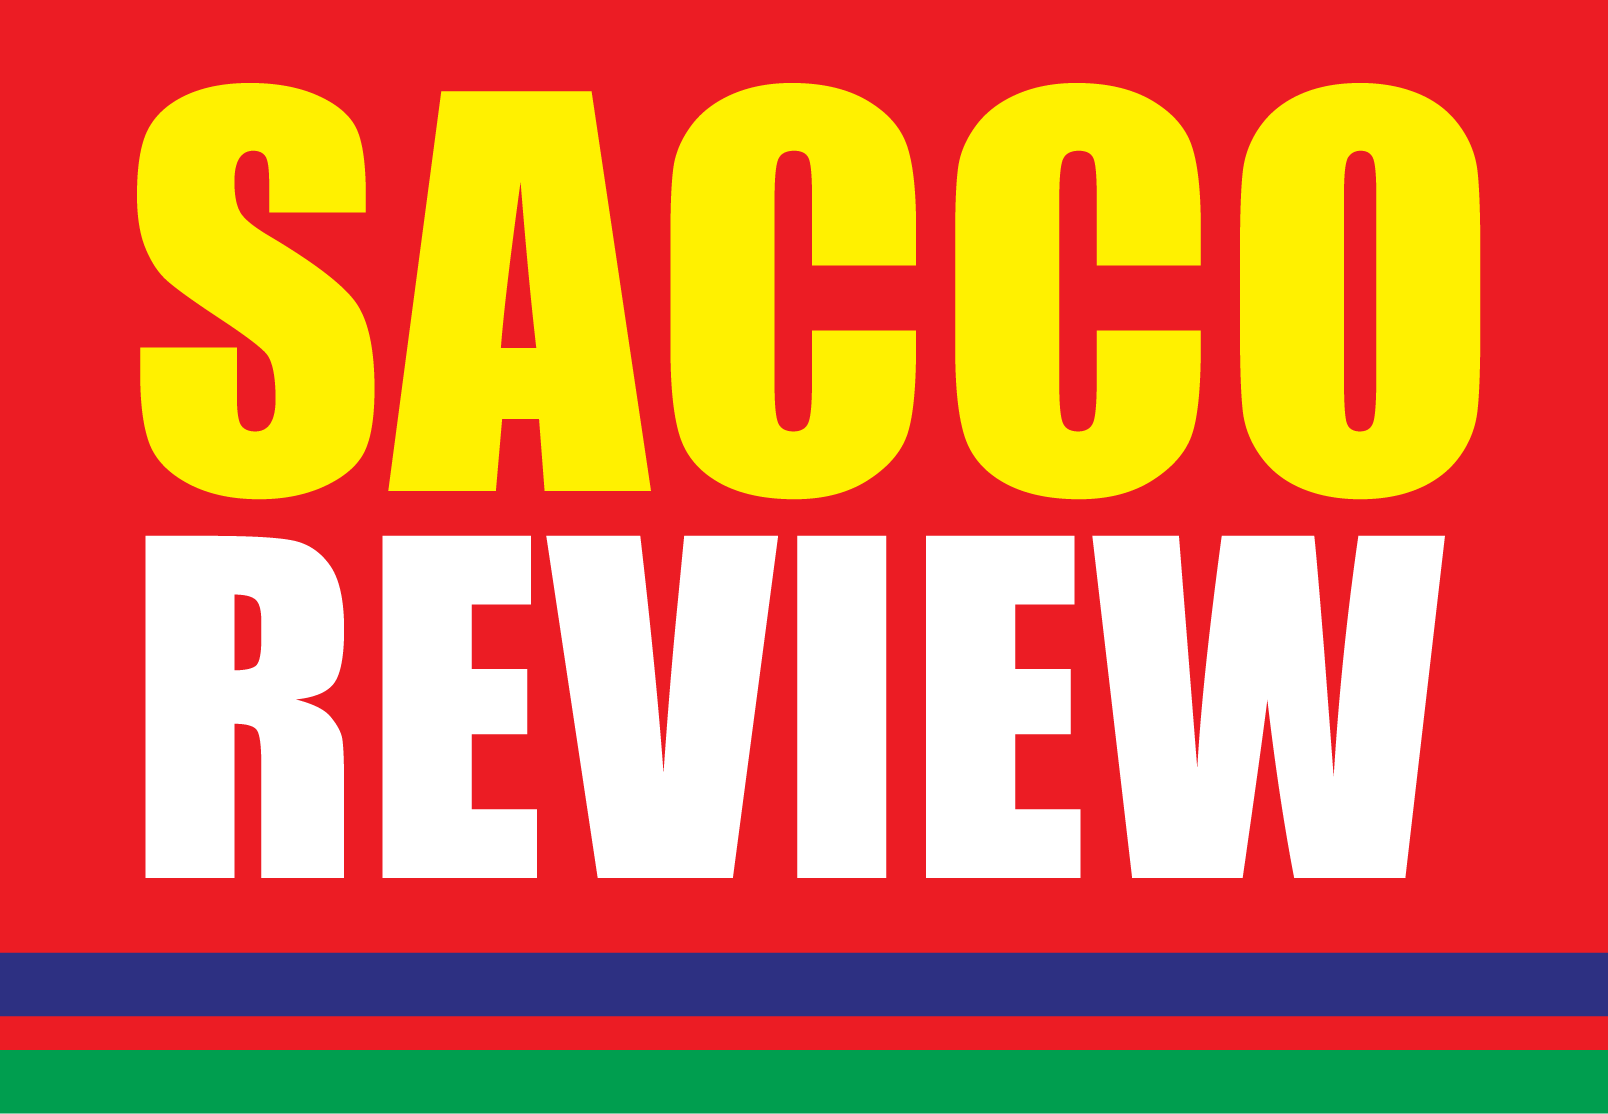 Sacco Review|The Leading Newspaper for Co-operative Movement in Kenya